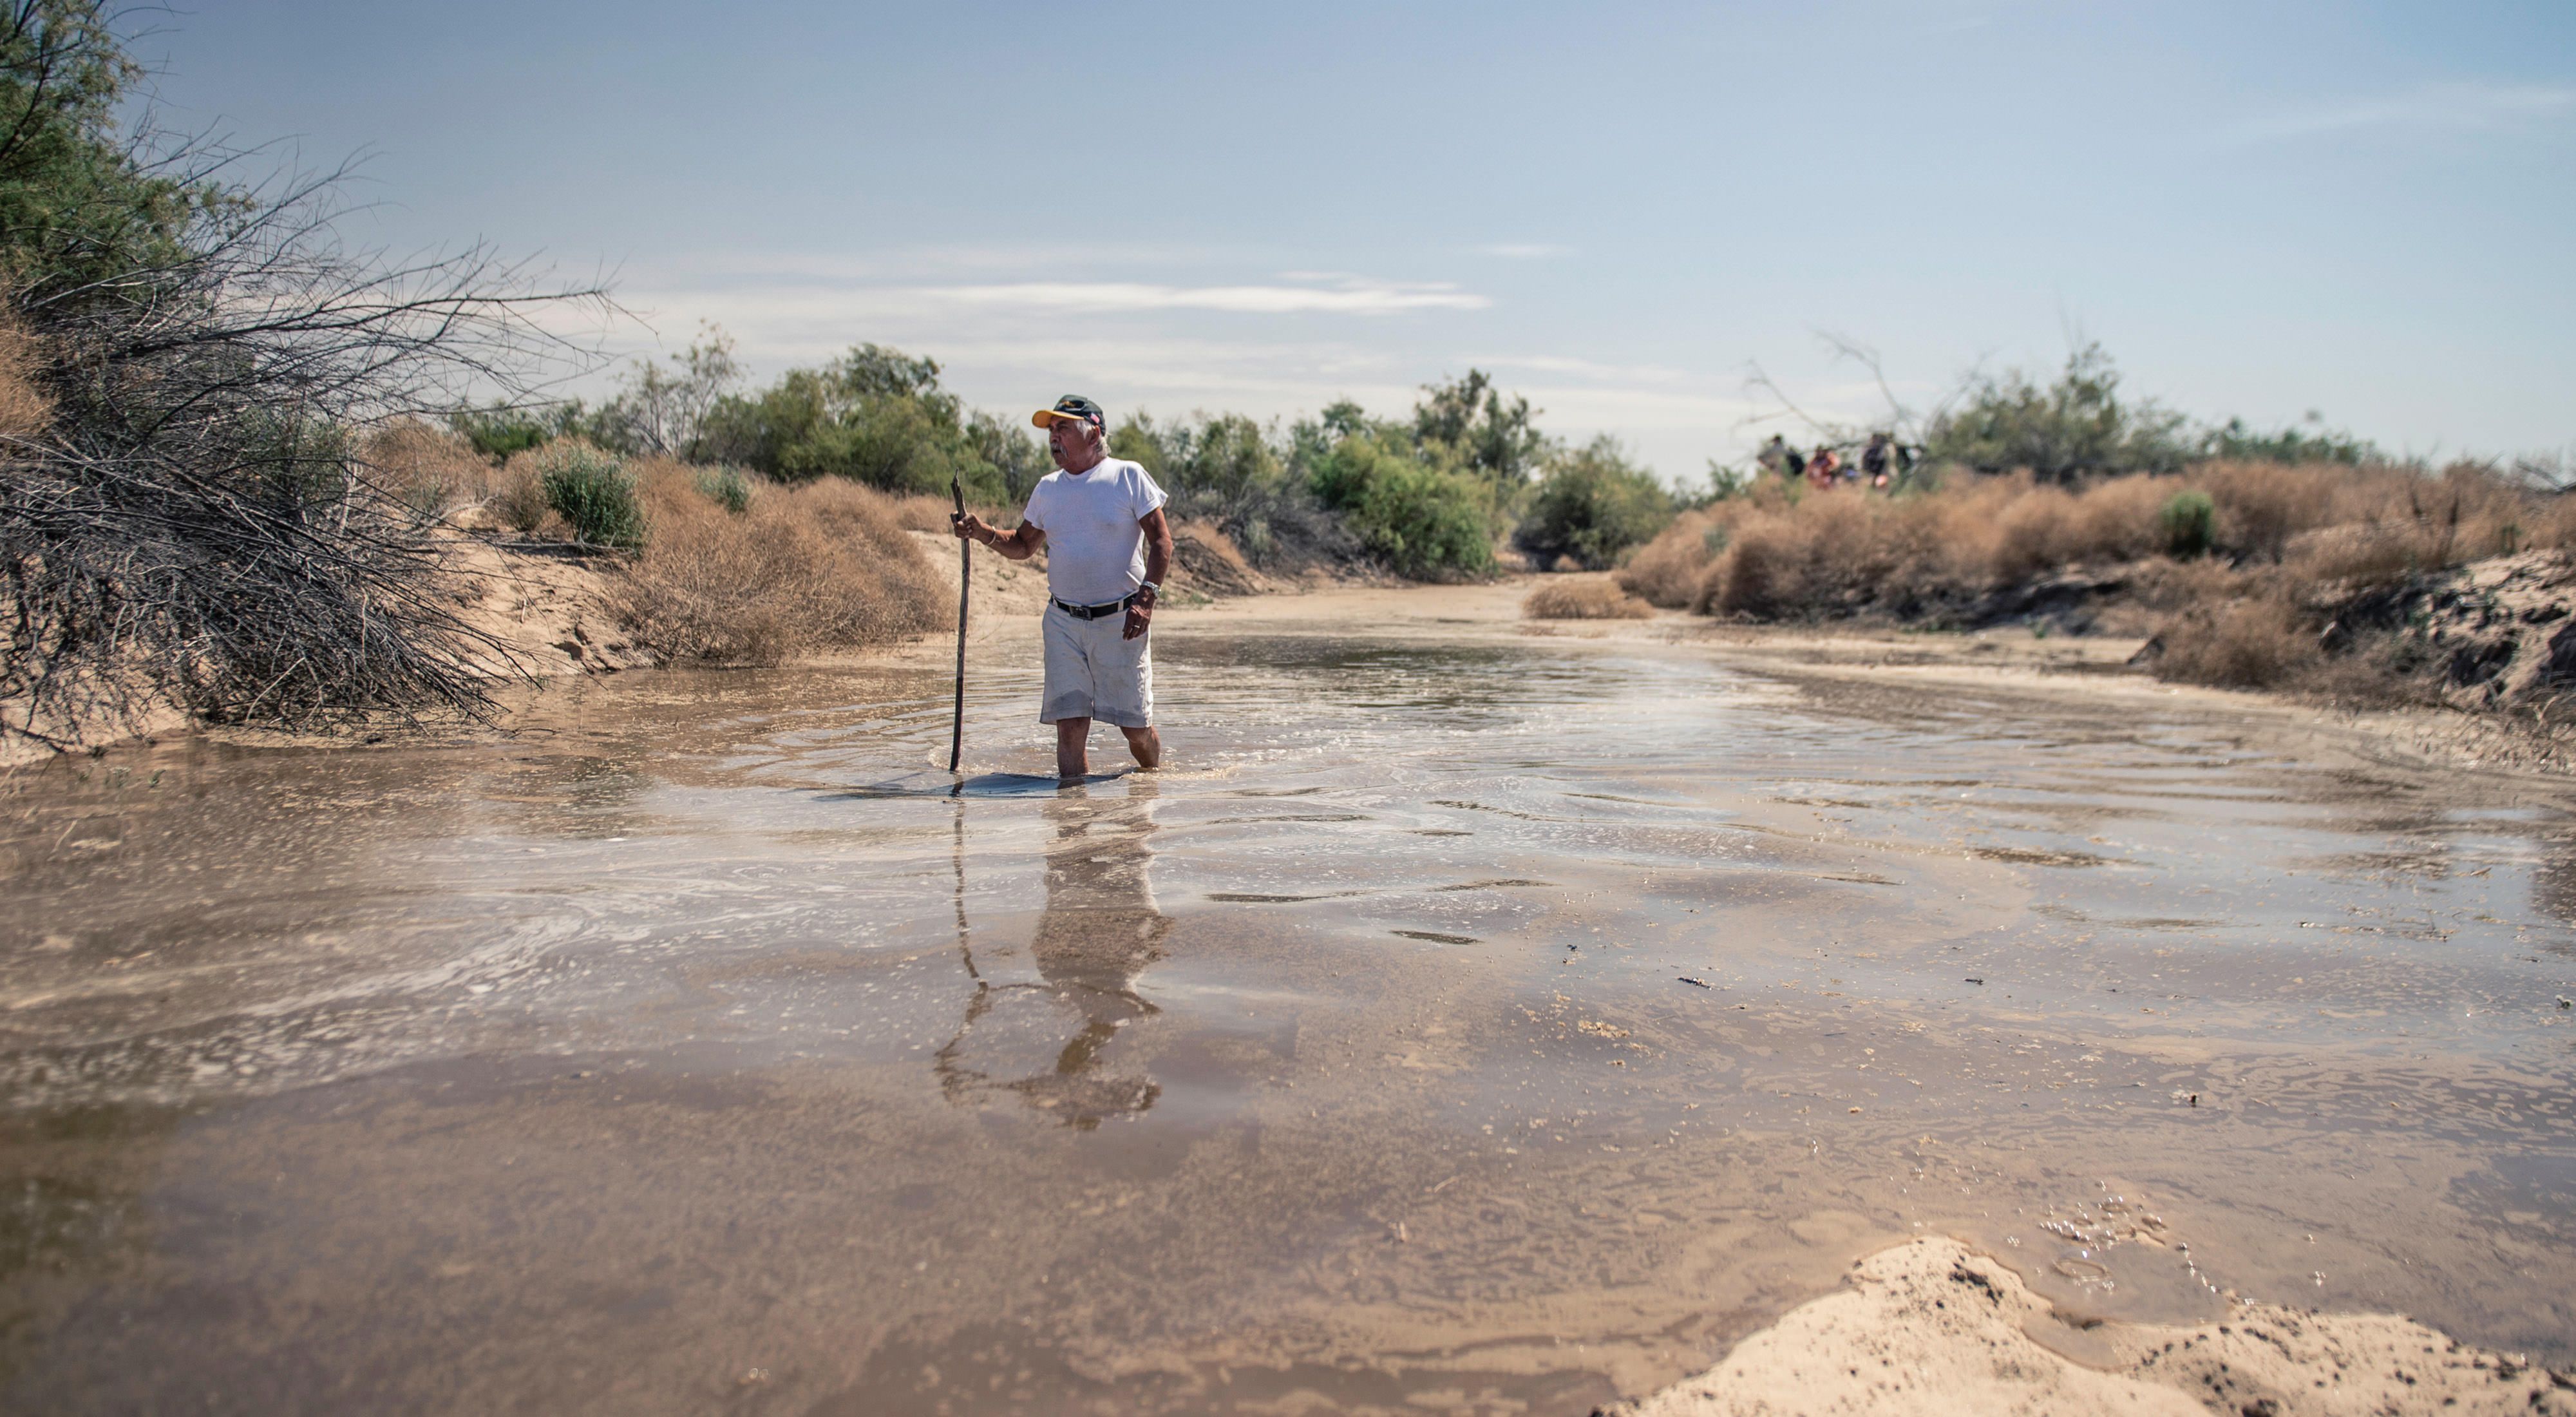 A release of water from the Morelos Dam temporarily revived the Colorado River in northern Mexico in spring 2014, encouraging the regrowth of native trees and inspiring locals to get their feet wet.